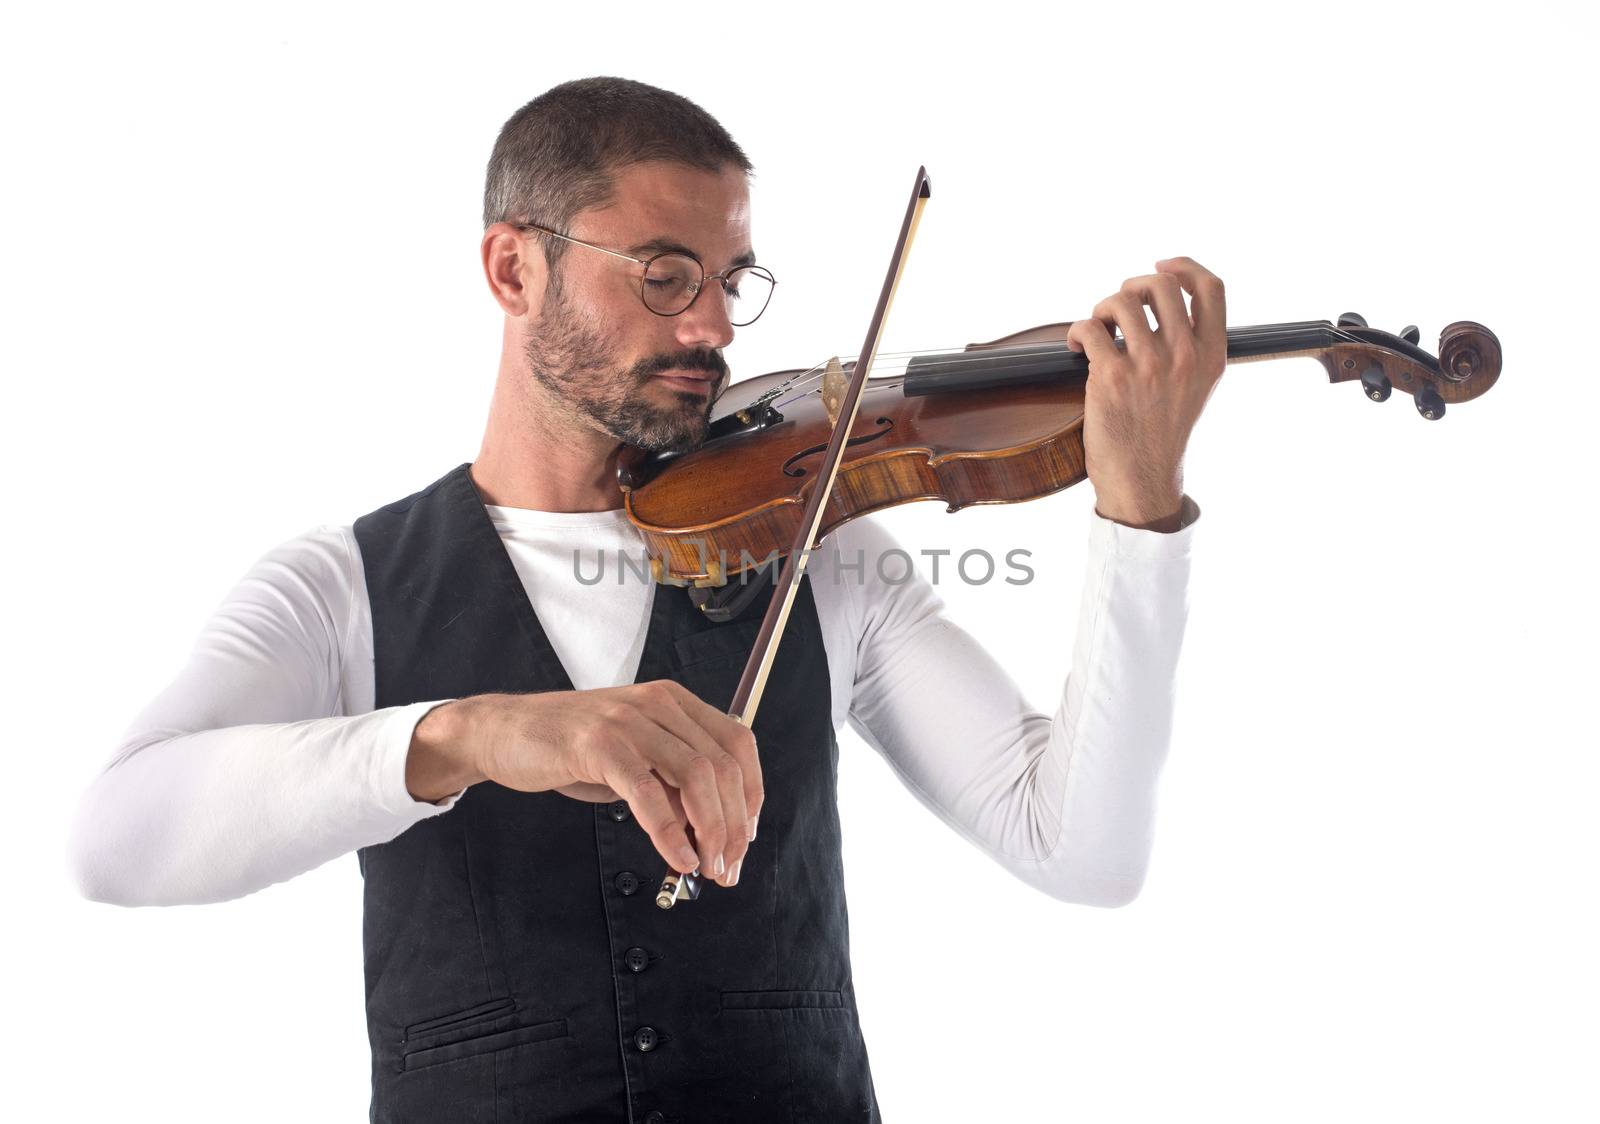 picture of a violinist in front of white background







picture of a violinist in studio